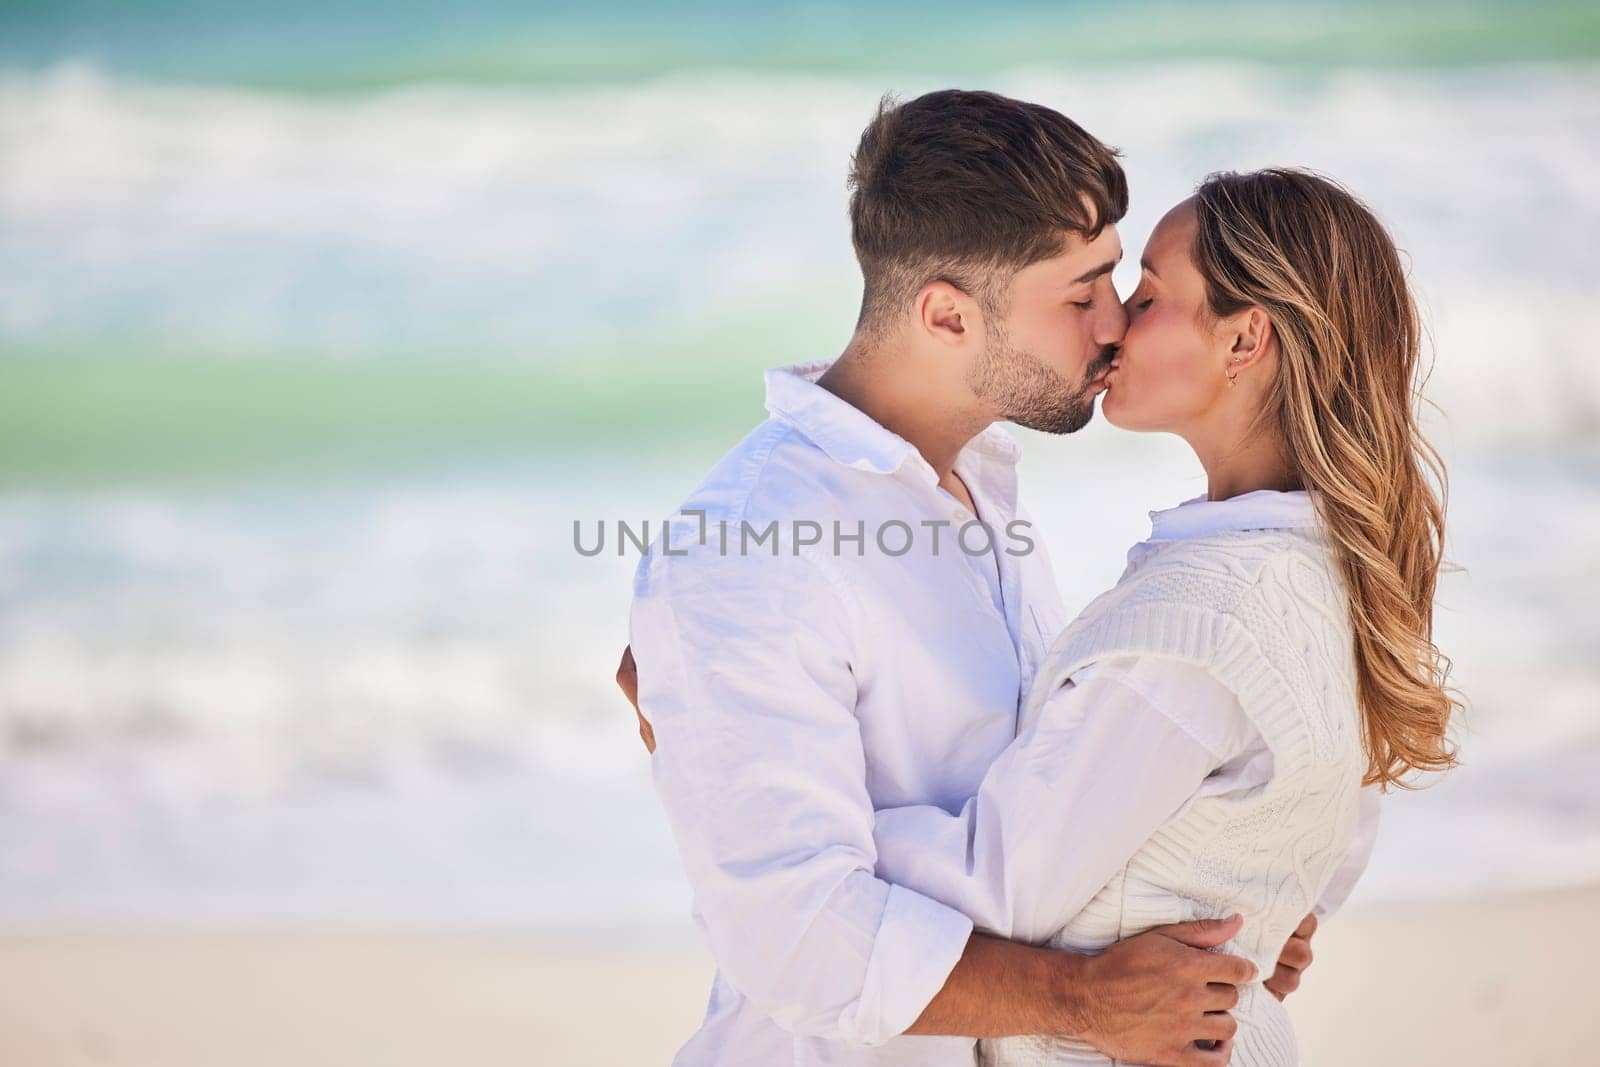 Mockup, beach or couple love to kiss on holiday vacation or romantic honeymoon to celebrate marriage commitment. Travel, trust or woman bonding, kissing or hugging partner in summer romance at sea by YuriArcurs